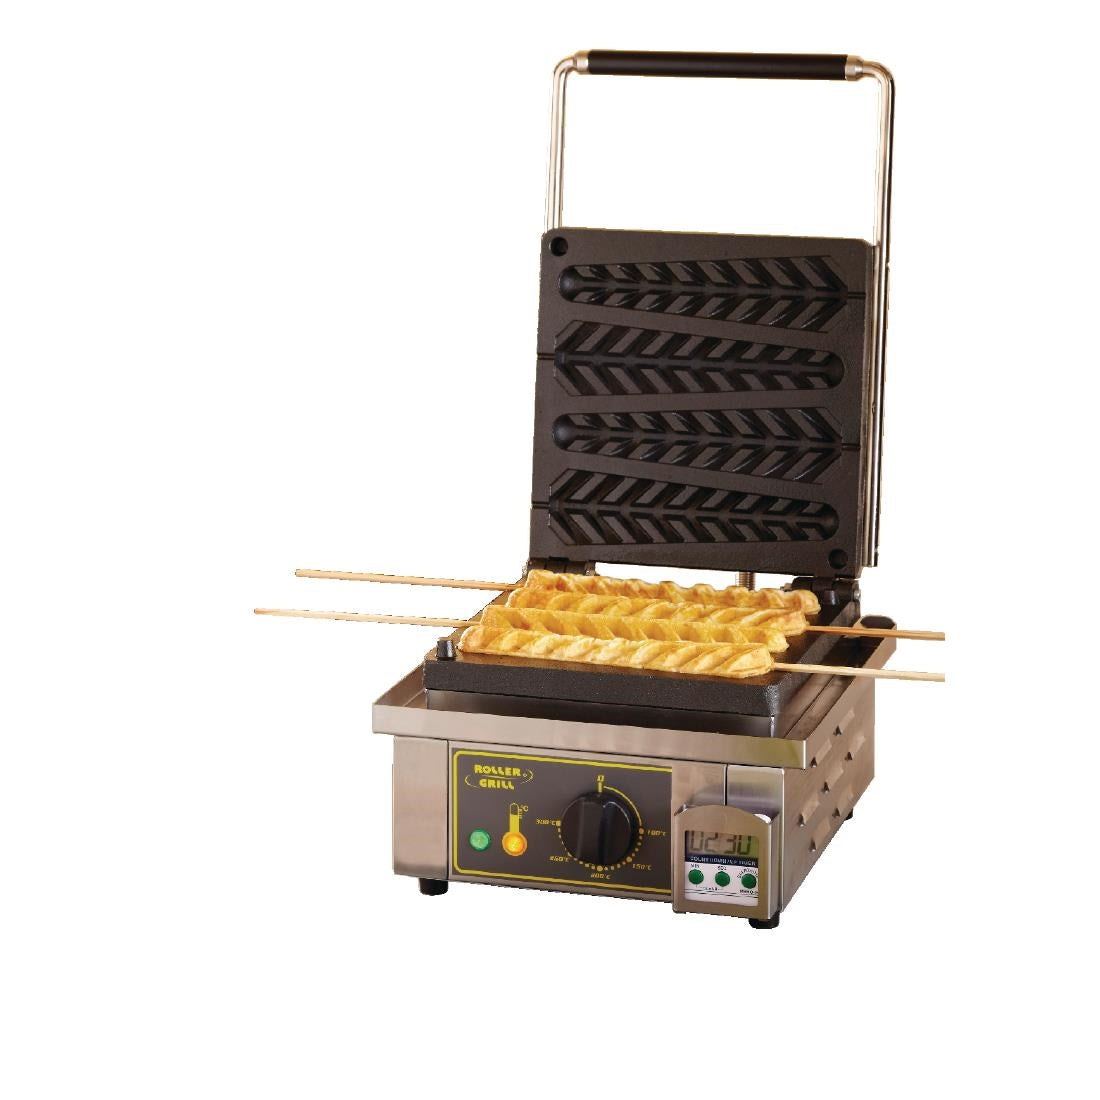 GD343 Roller Grill Corn Waffle Maker GES23 JD Catering Equipment Solutions Ltd